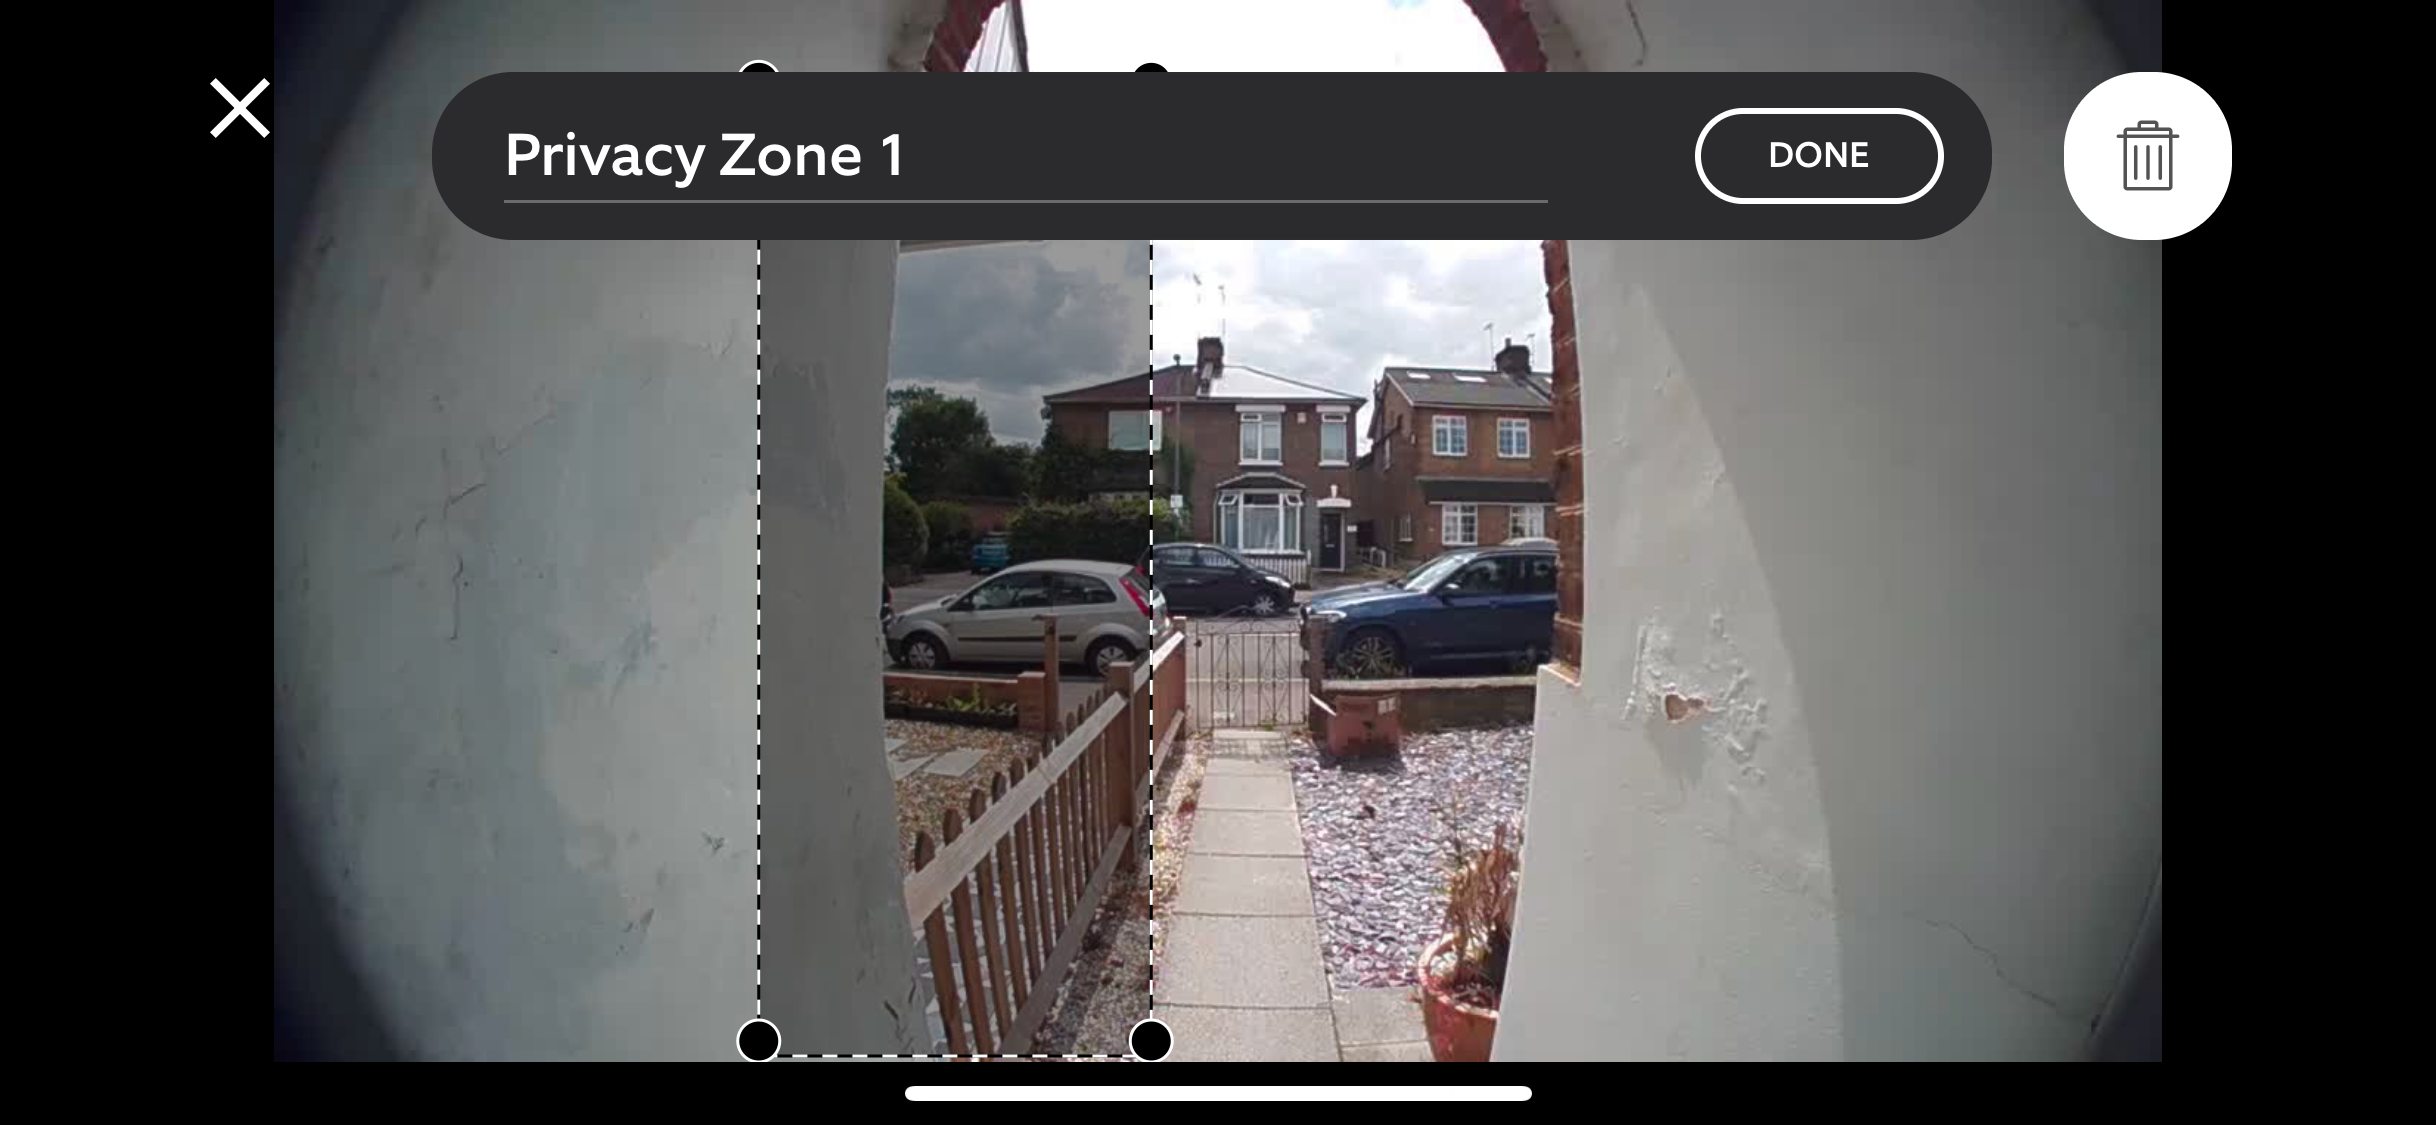 Ring Door View Cam privacy zone